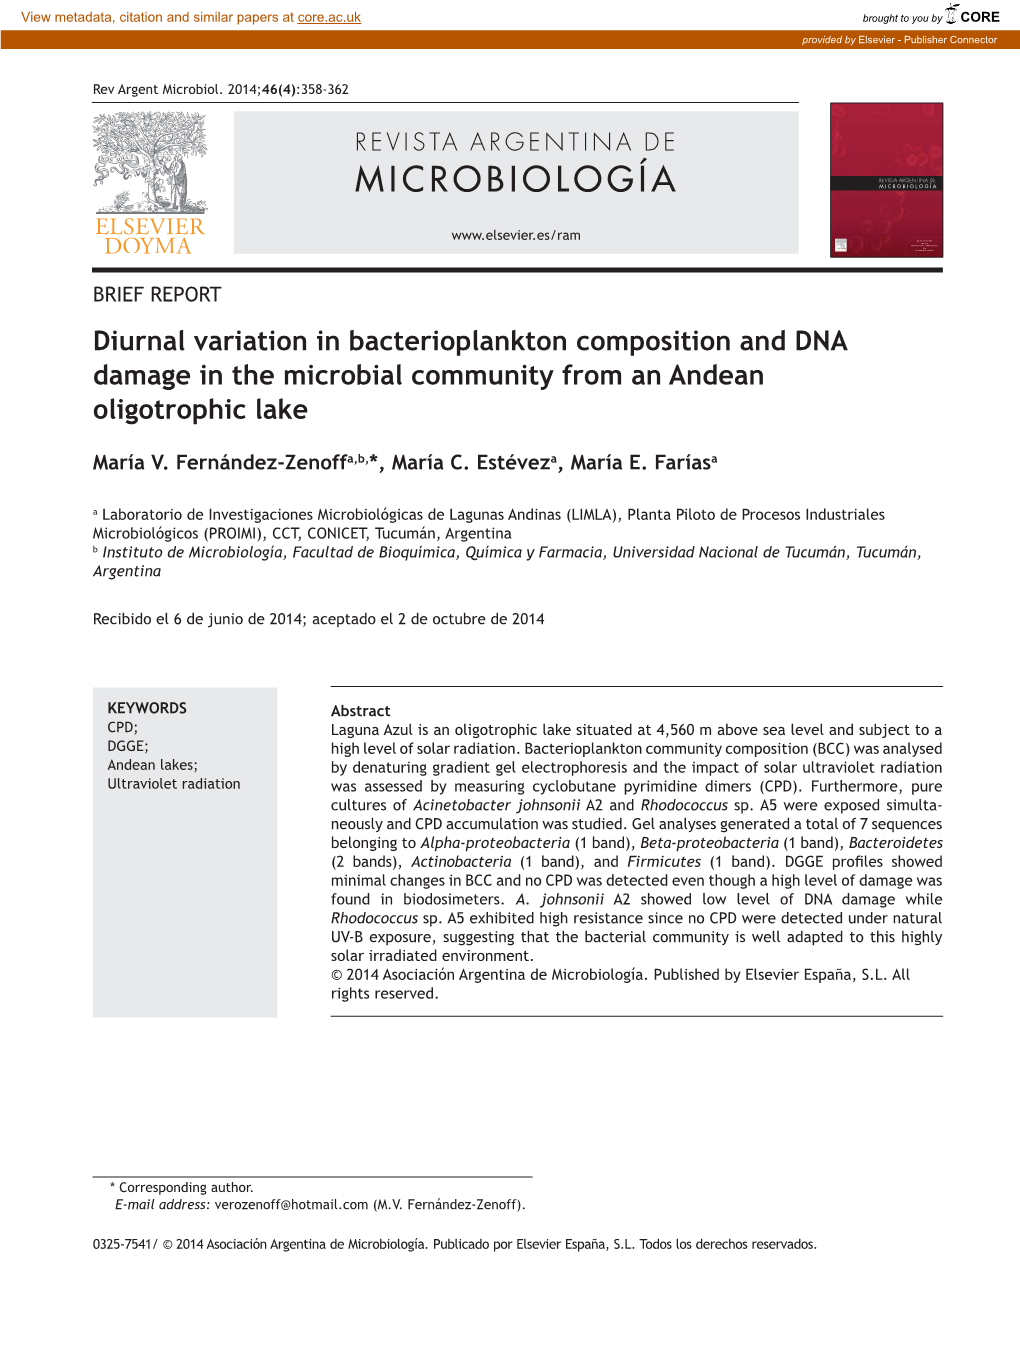 Diurnal Variation in Bacterioplankton Composition and DNA Damage in the Microbial Community from an Andean Oligotrophic Lake